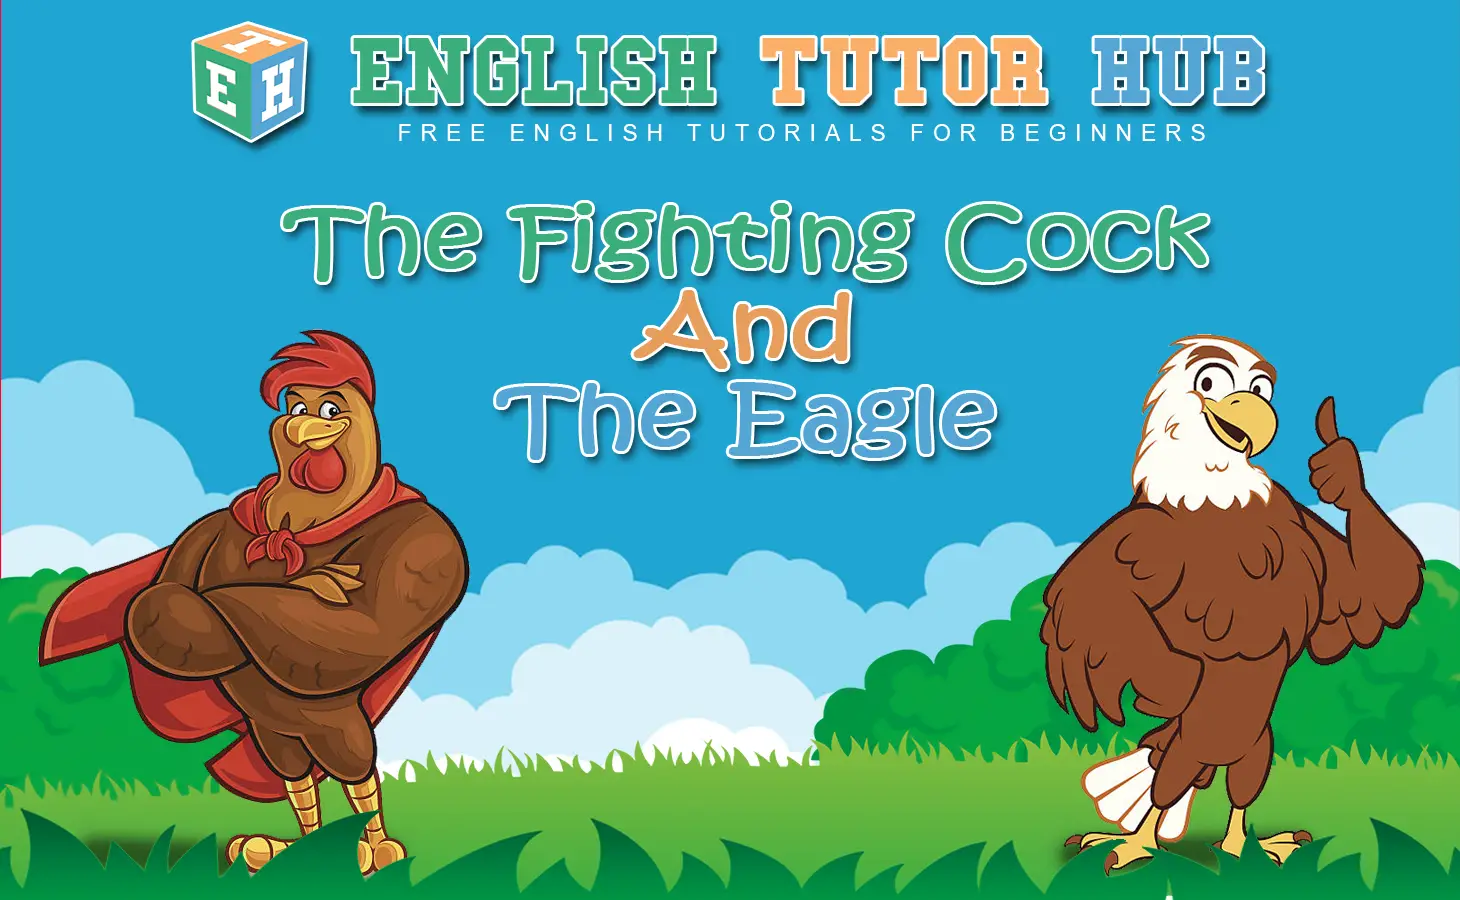 The Fighting Cocks & the Eagle Story With Moral Lesson And Summary